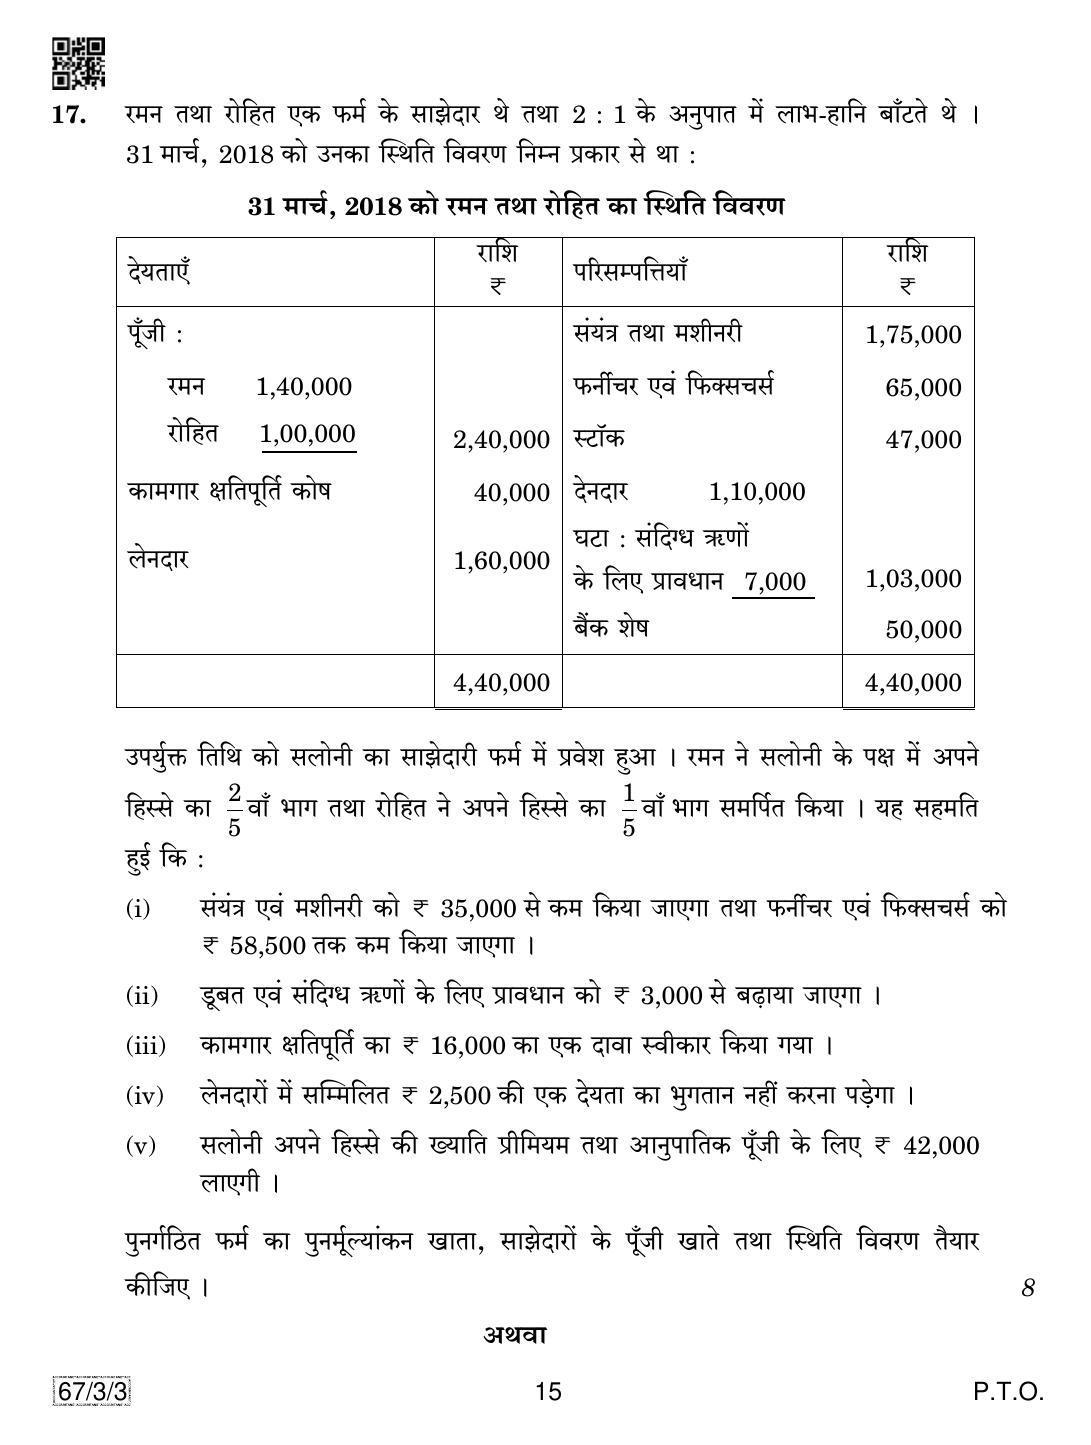 CBSE Class 12 67-3-3 Accountancy 2019 Question Paper - Page 15